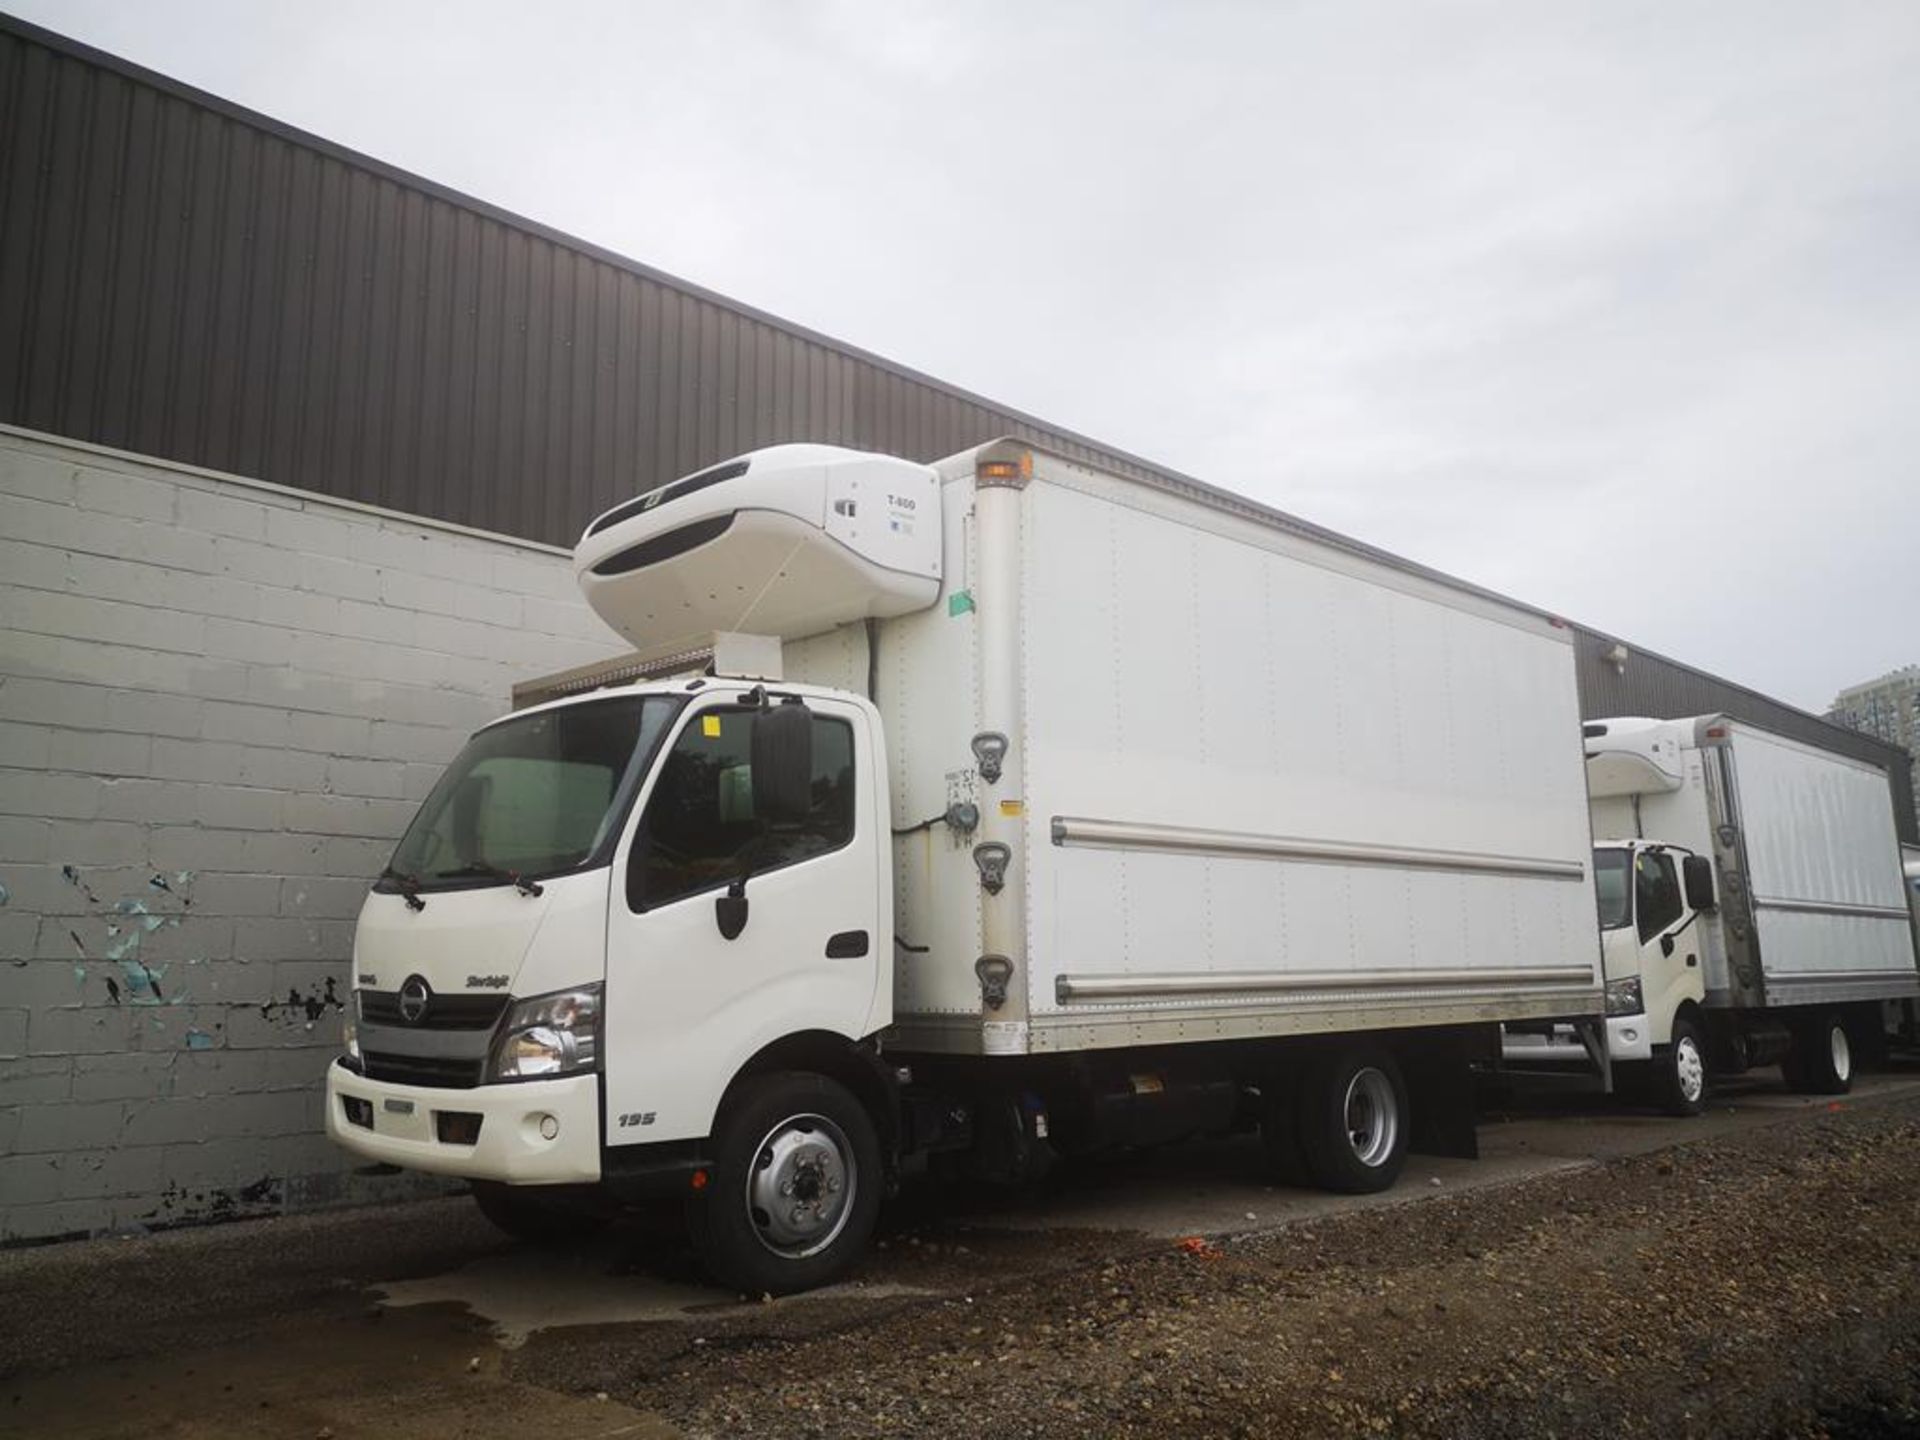 2013, HINO, 195, REEFER TRUCK, MULTIVANS, 18', INSULATED BOX, THERMOKING, T800 WHISPER, REEFER,